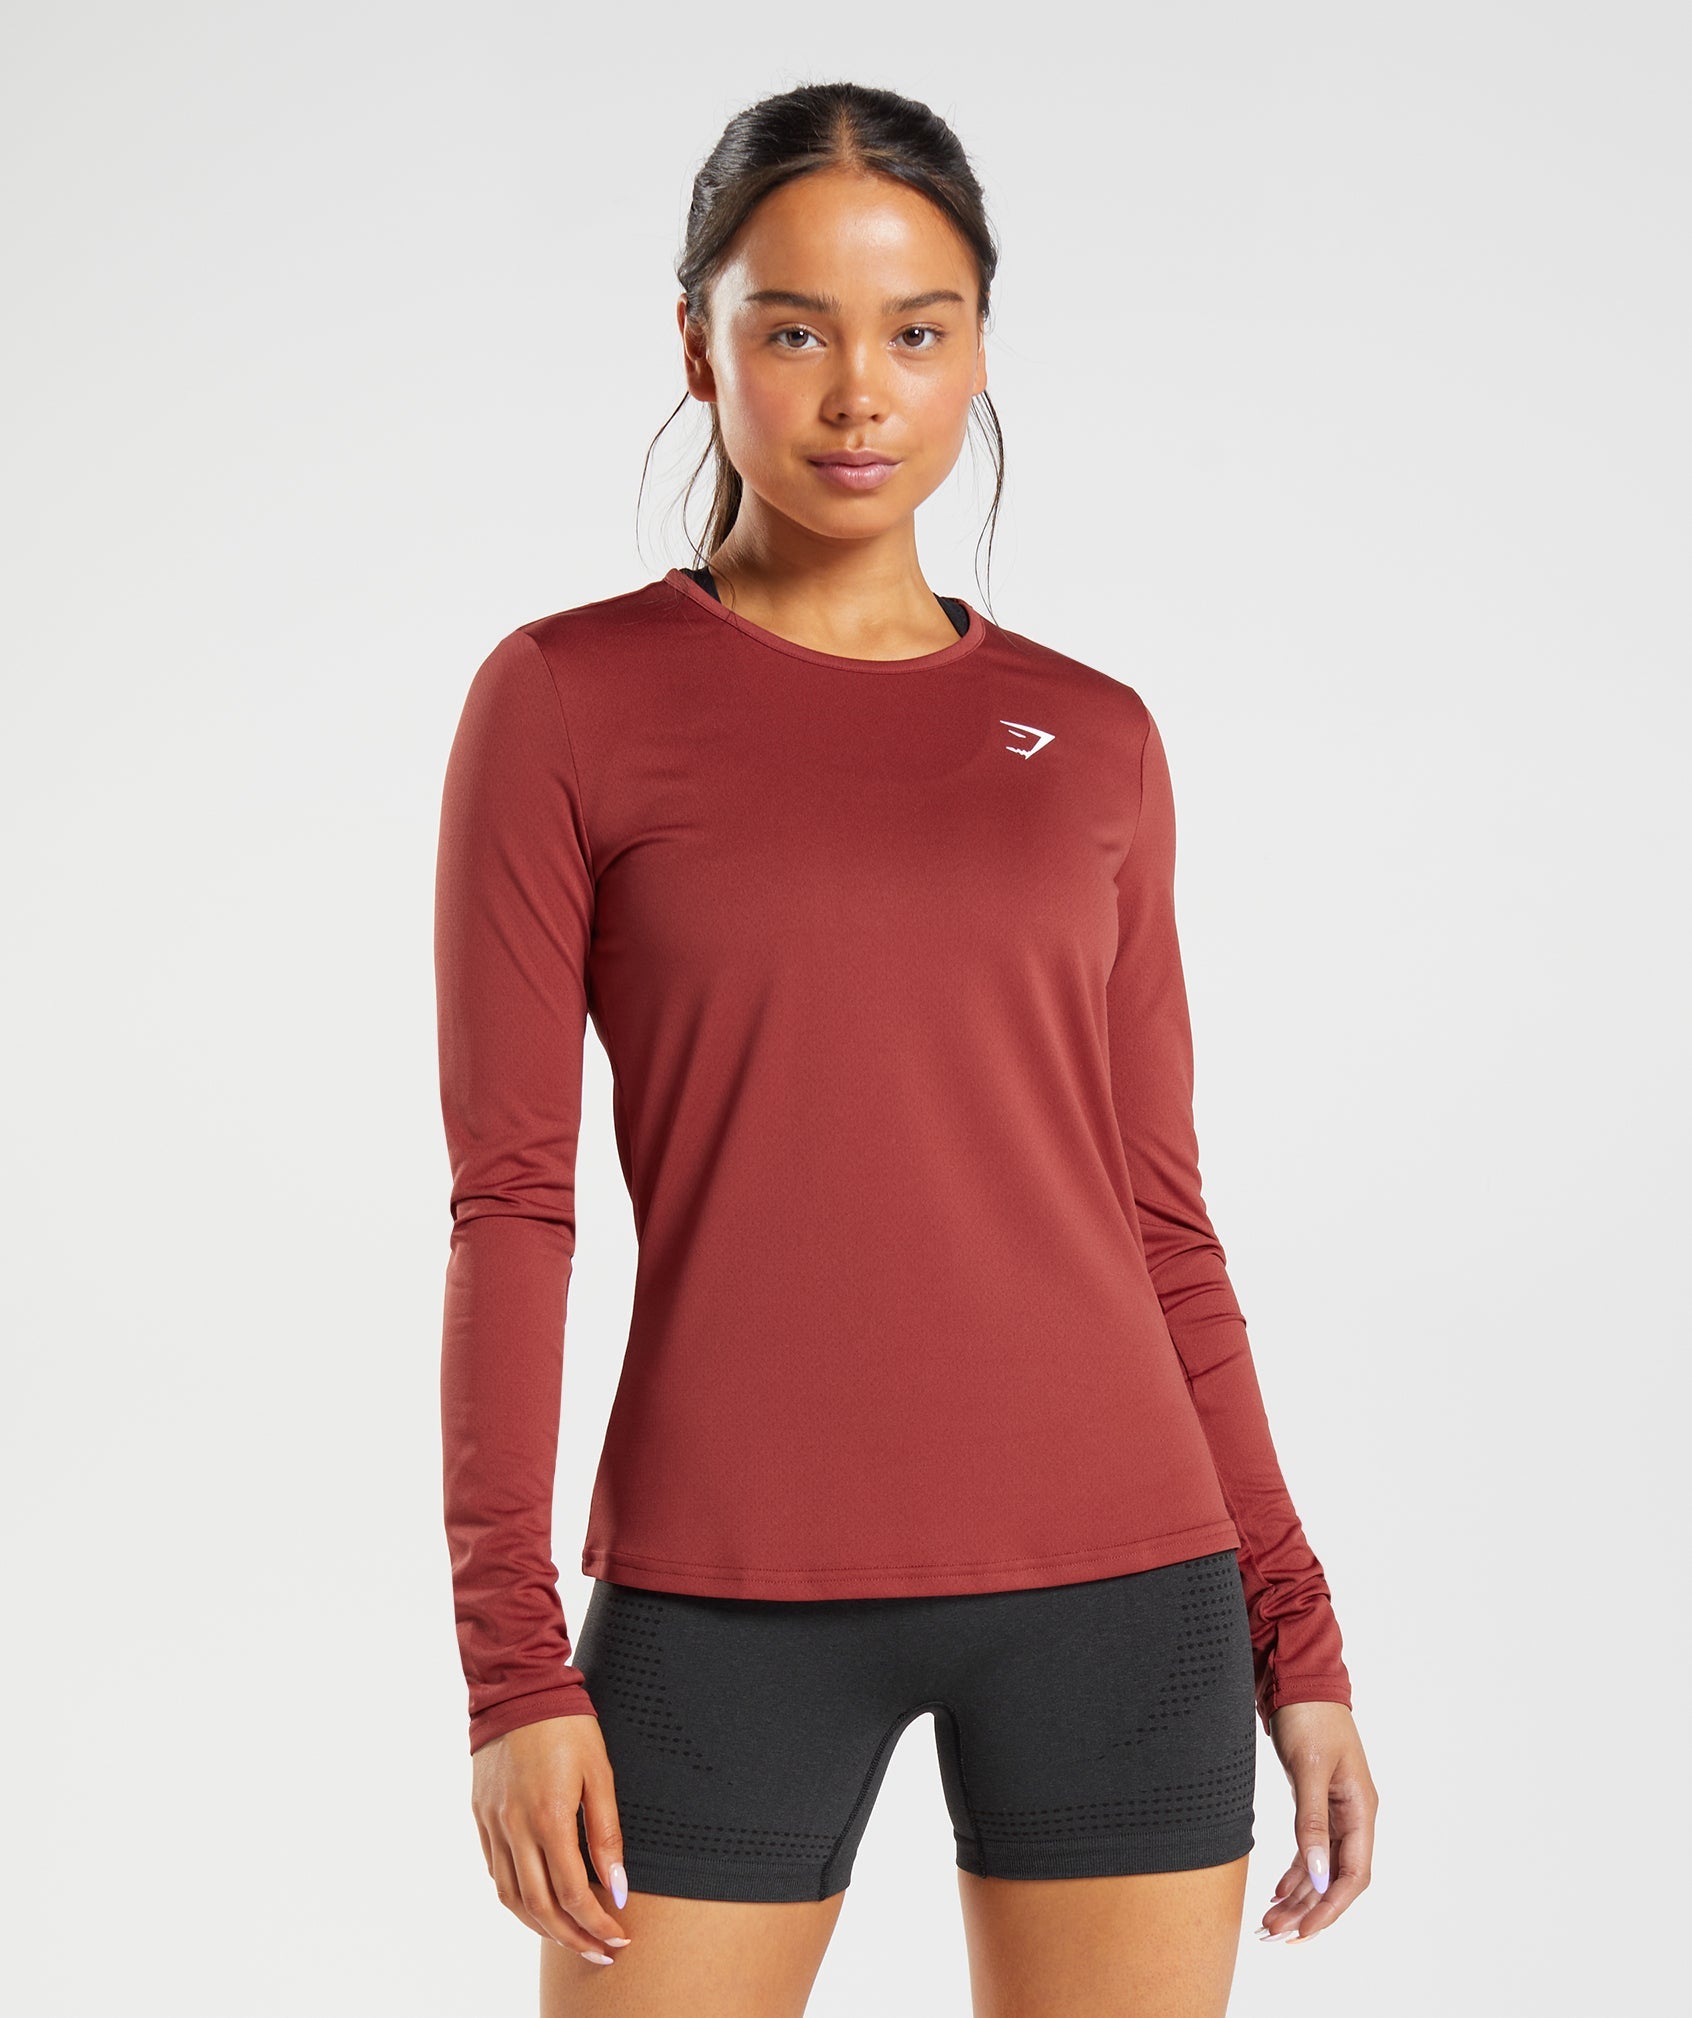 Training Long Sleeve Top in Rosewood Red